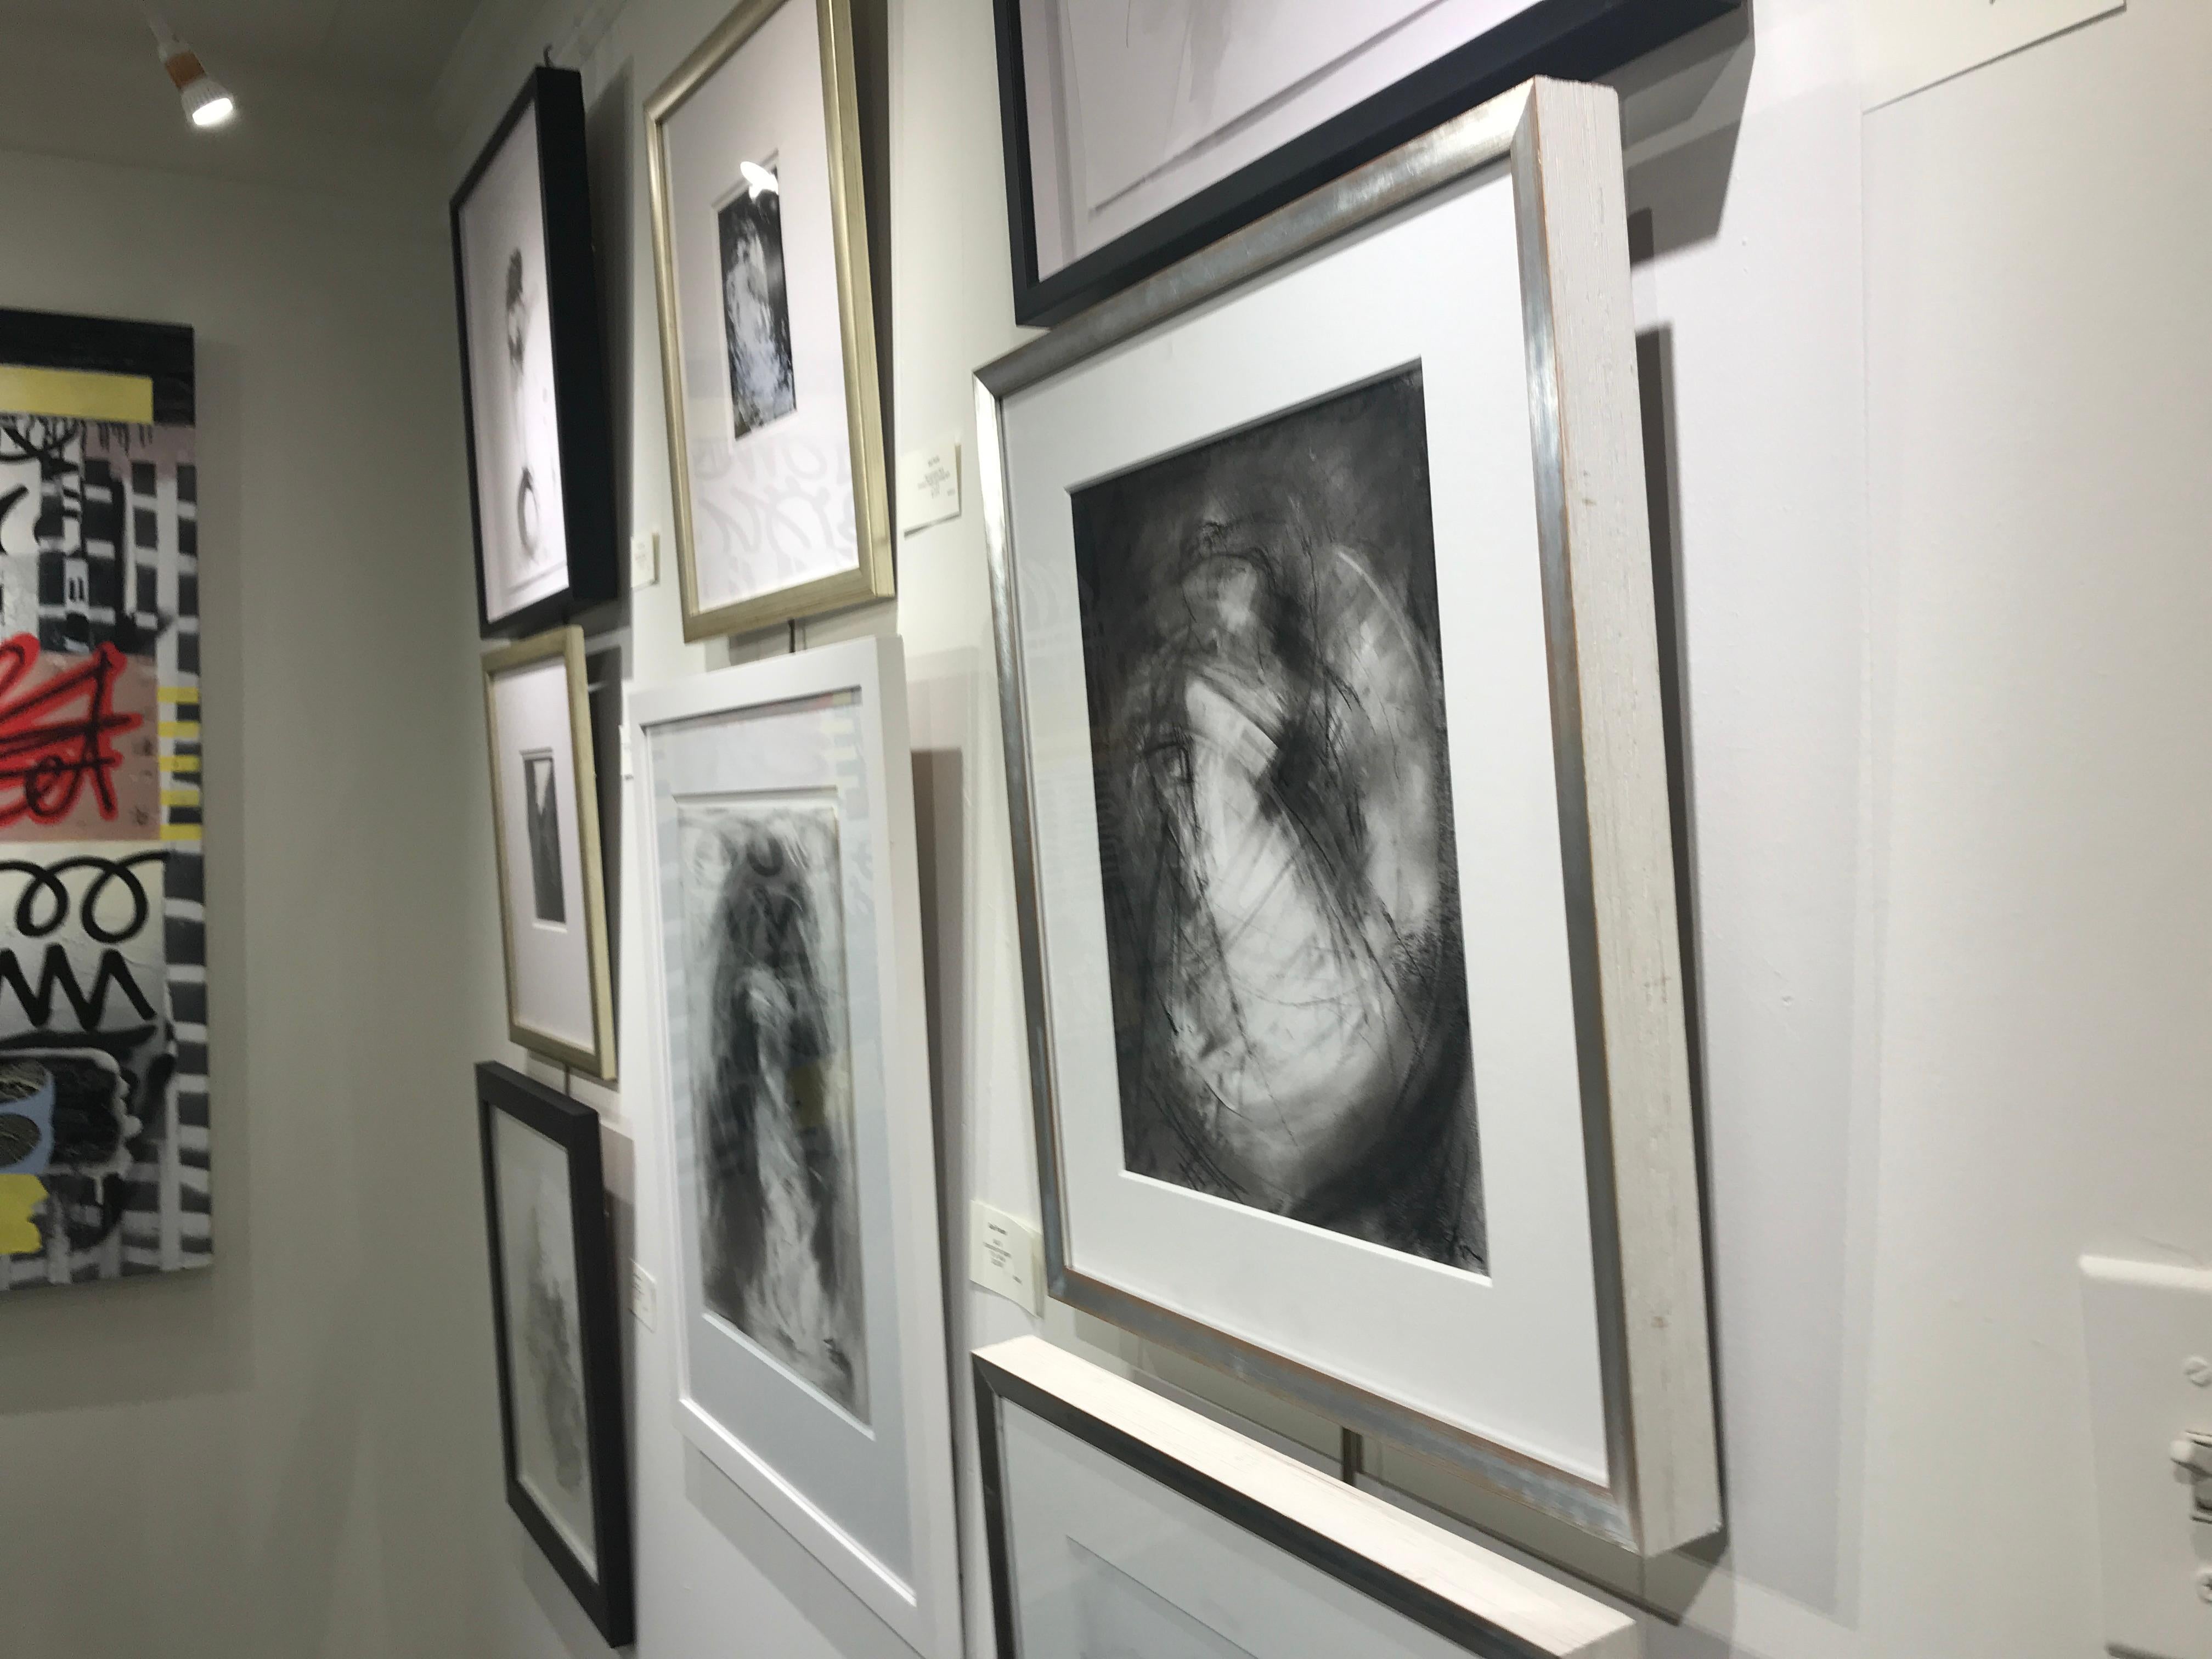 Currents III by Gail Foster 2018 Petite Framed Charcoal on Paper Figurative 5